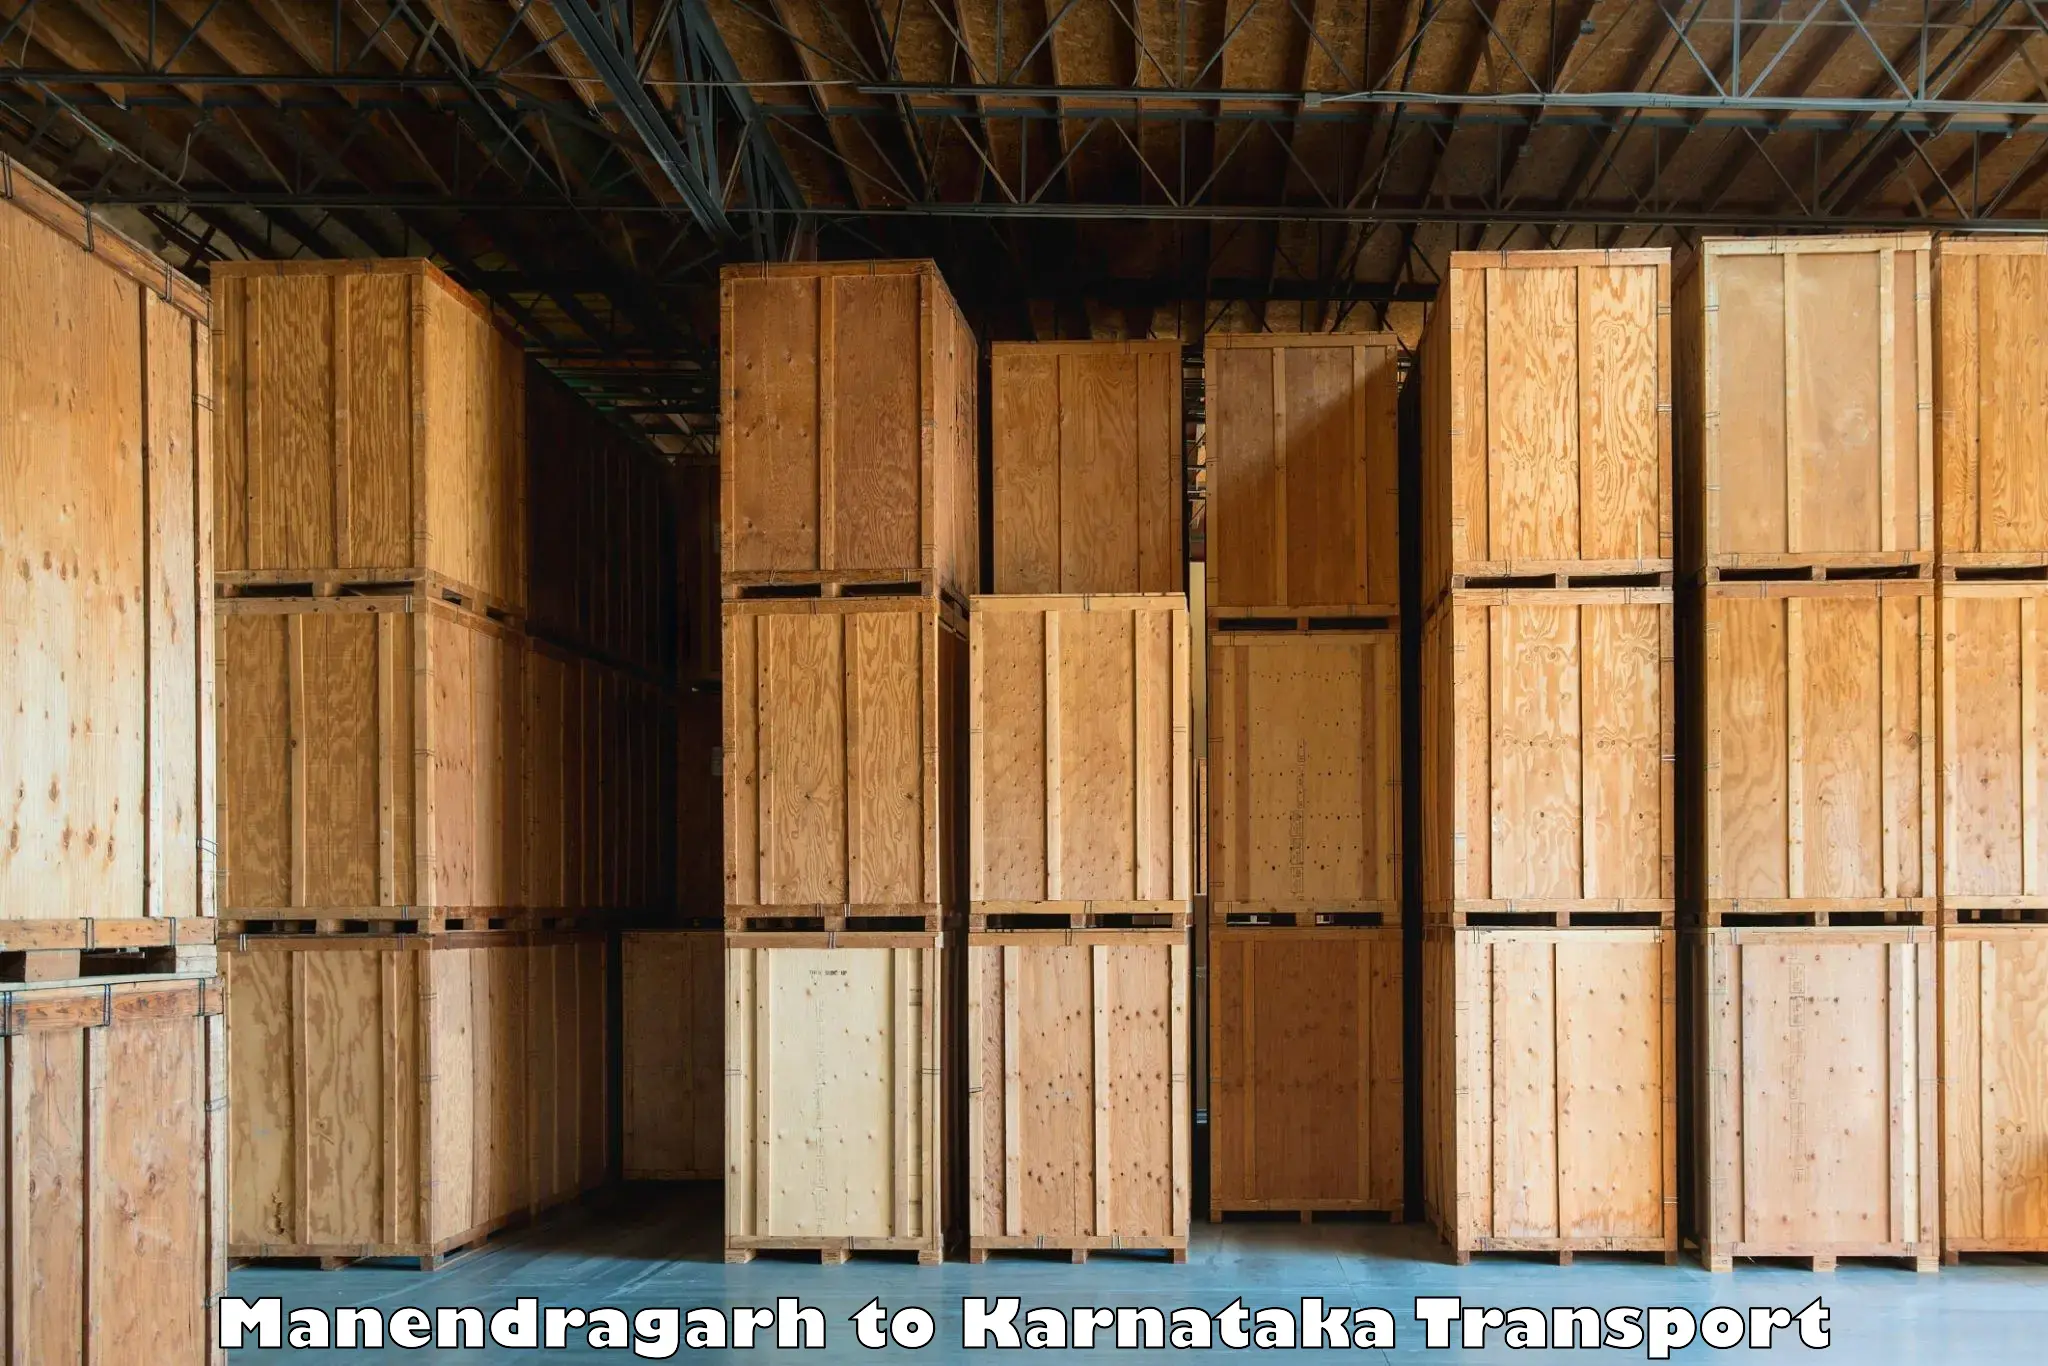 Nearby transport service Manendragarh to Jagalur